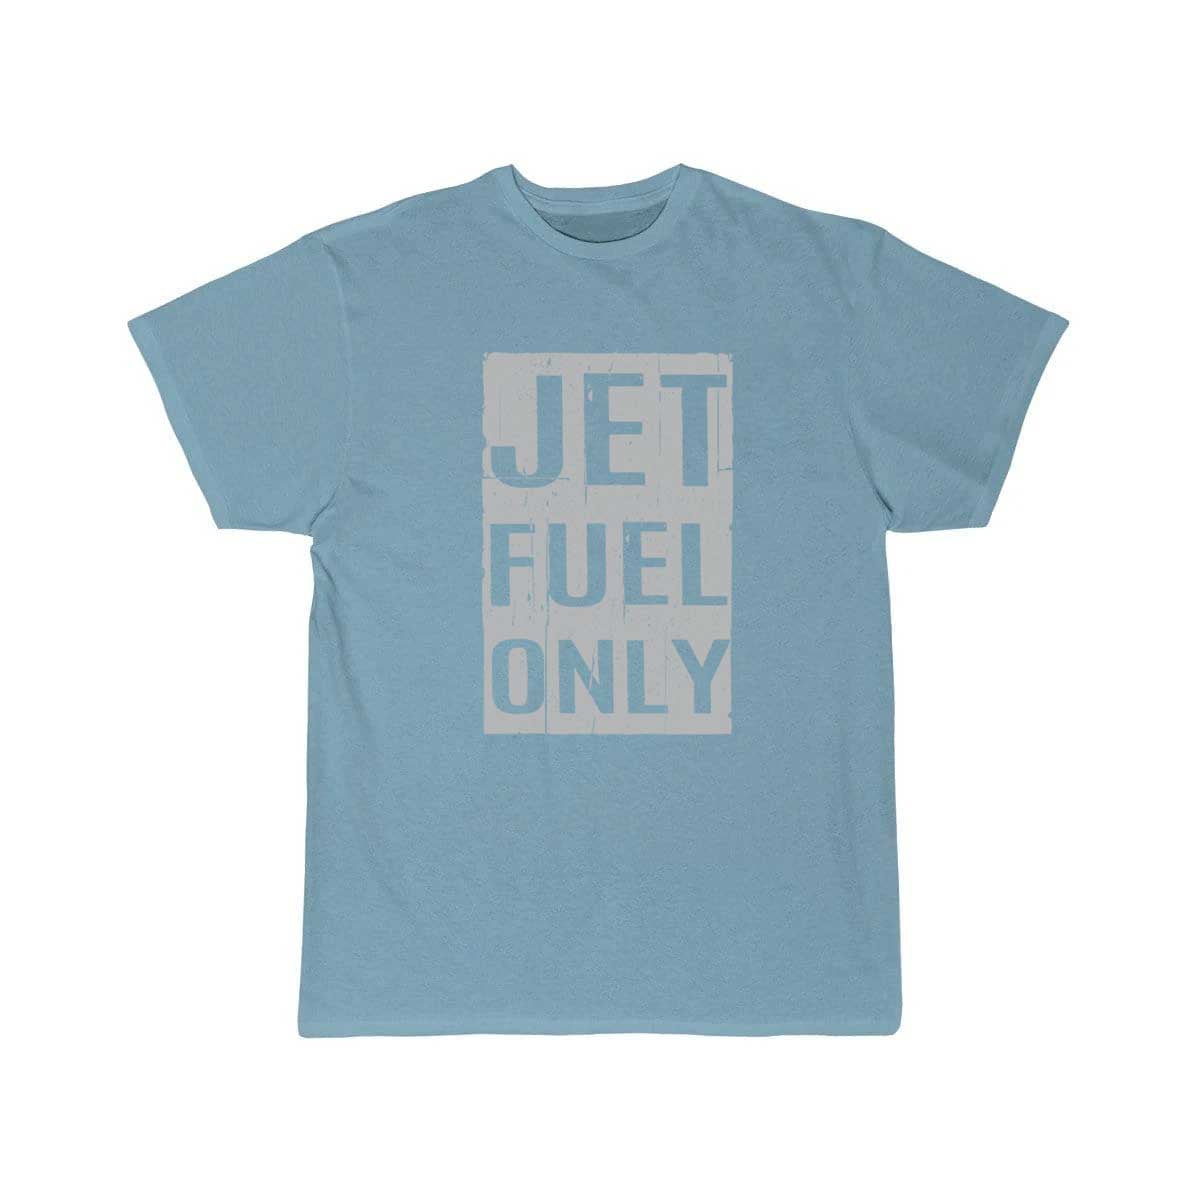 Cool Jet Fuel Only Distressed Air Force gift T Shirt THE AV8R